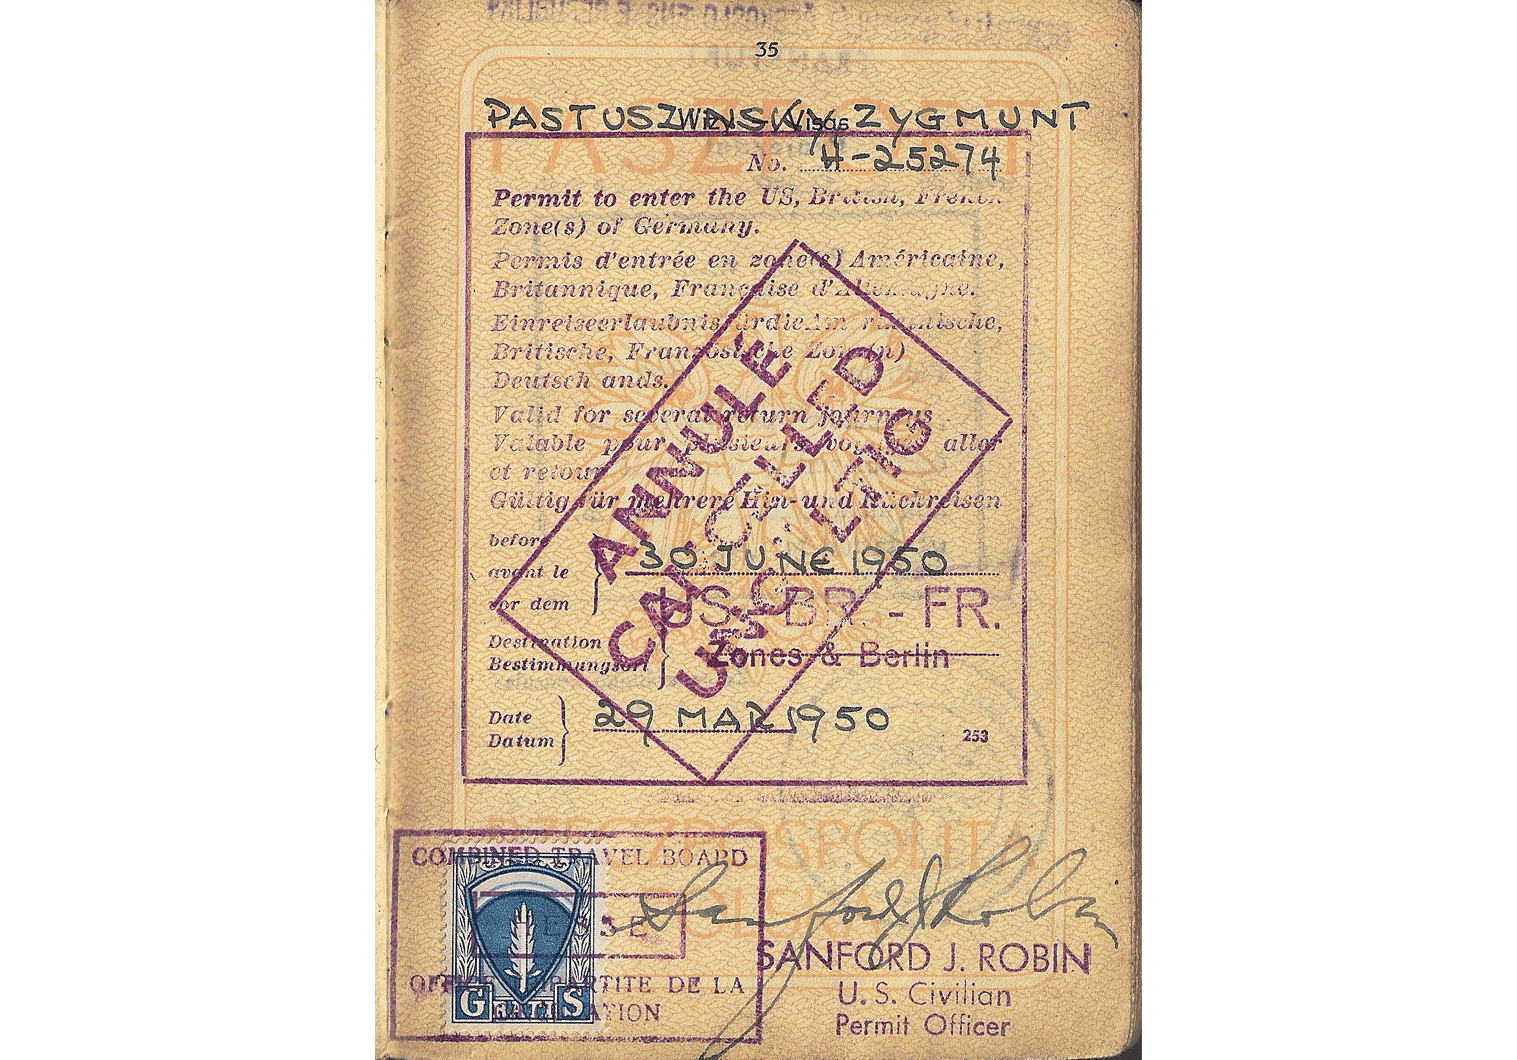 Allied Military Government visa